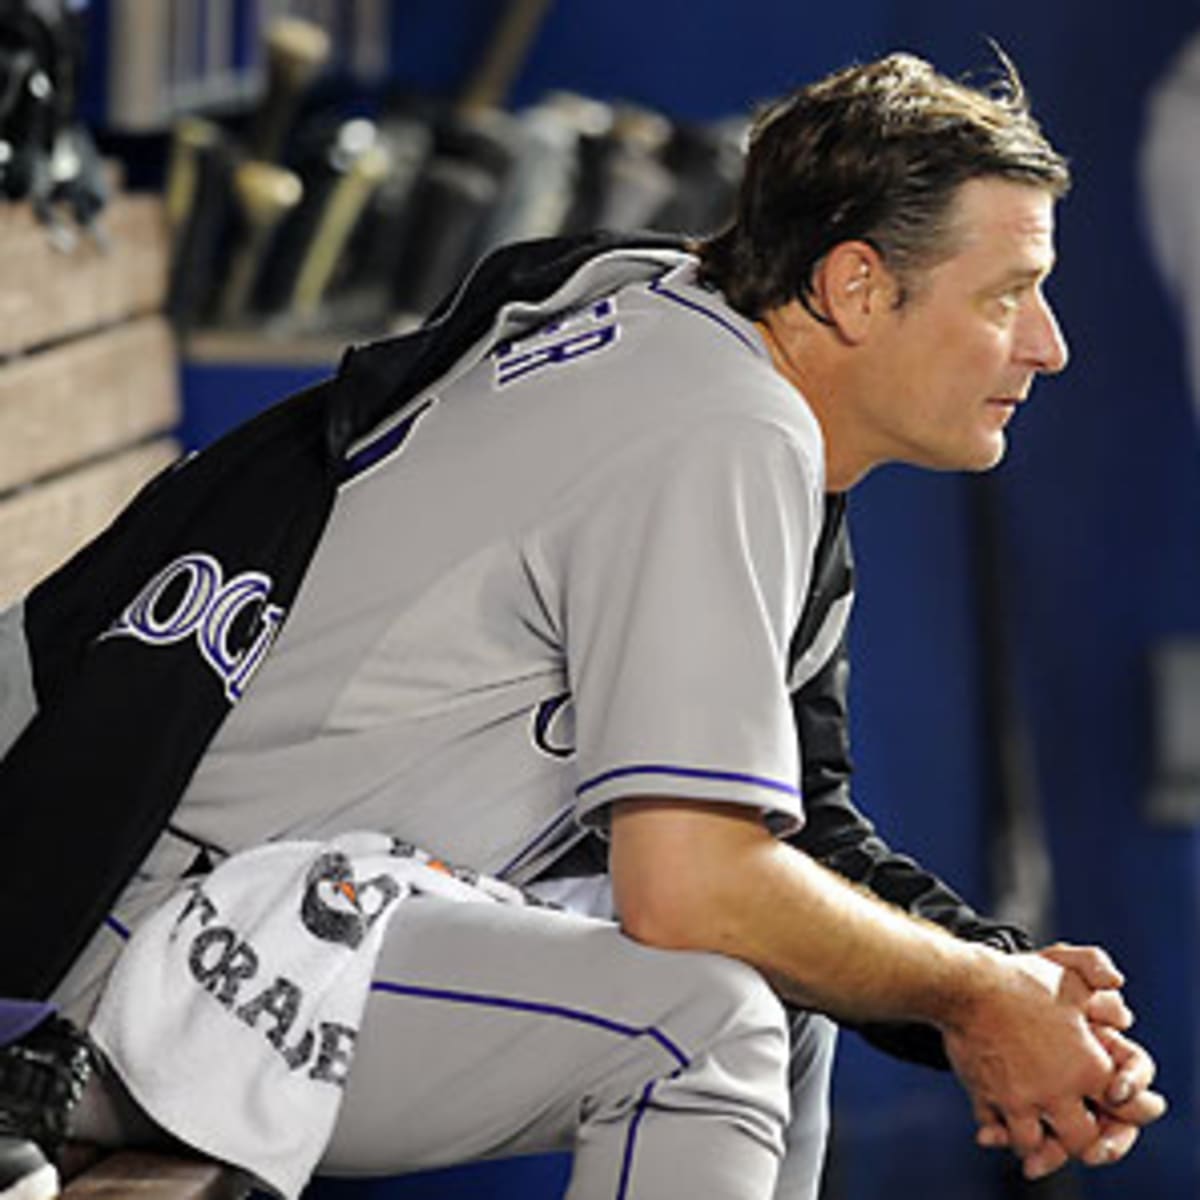 No more for Moyer? - Sports Illustrated